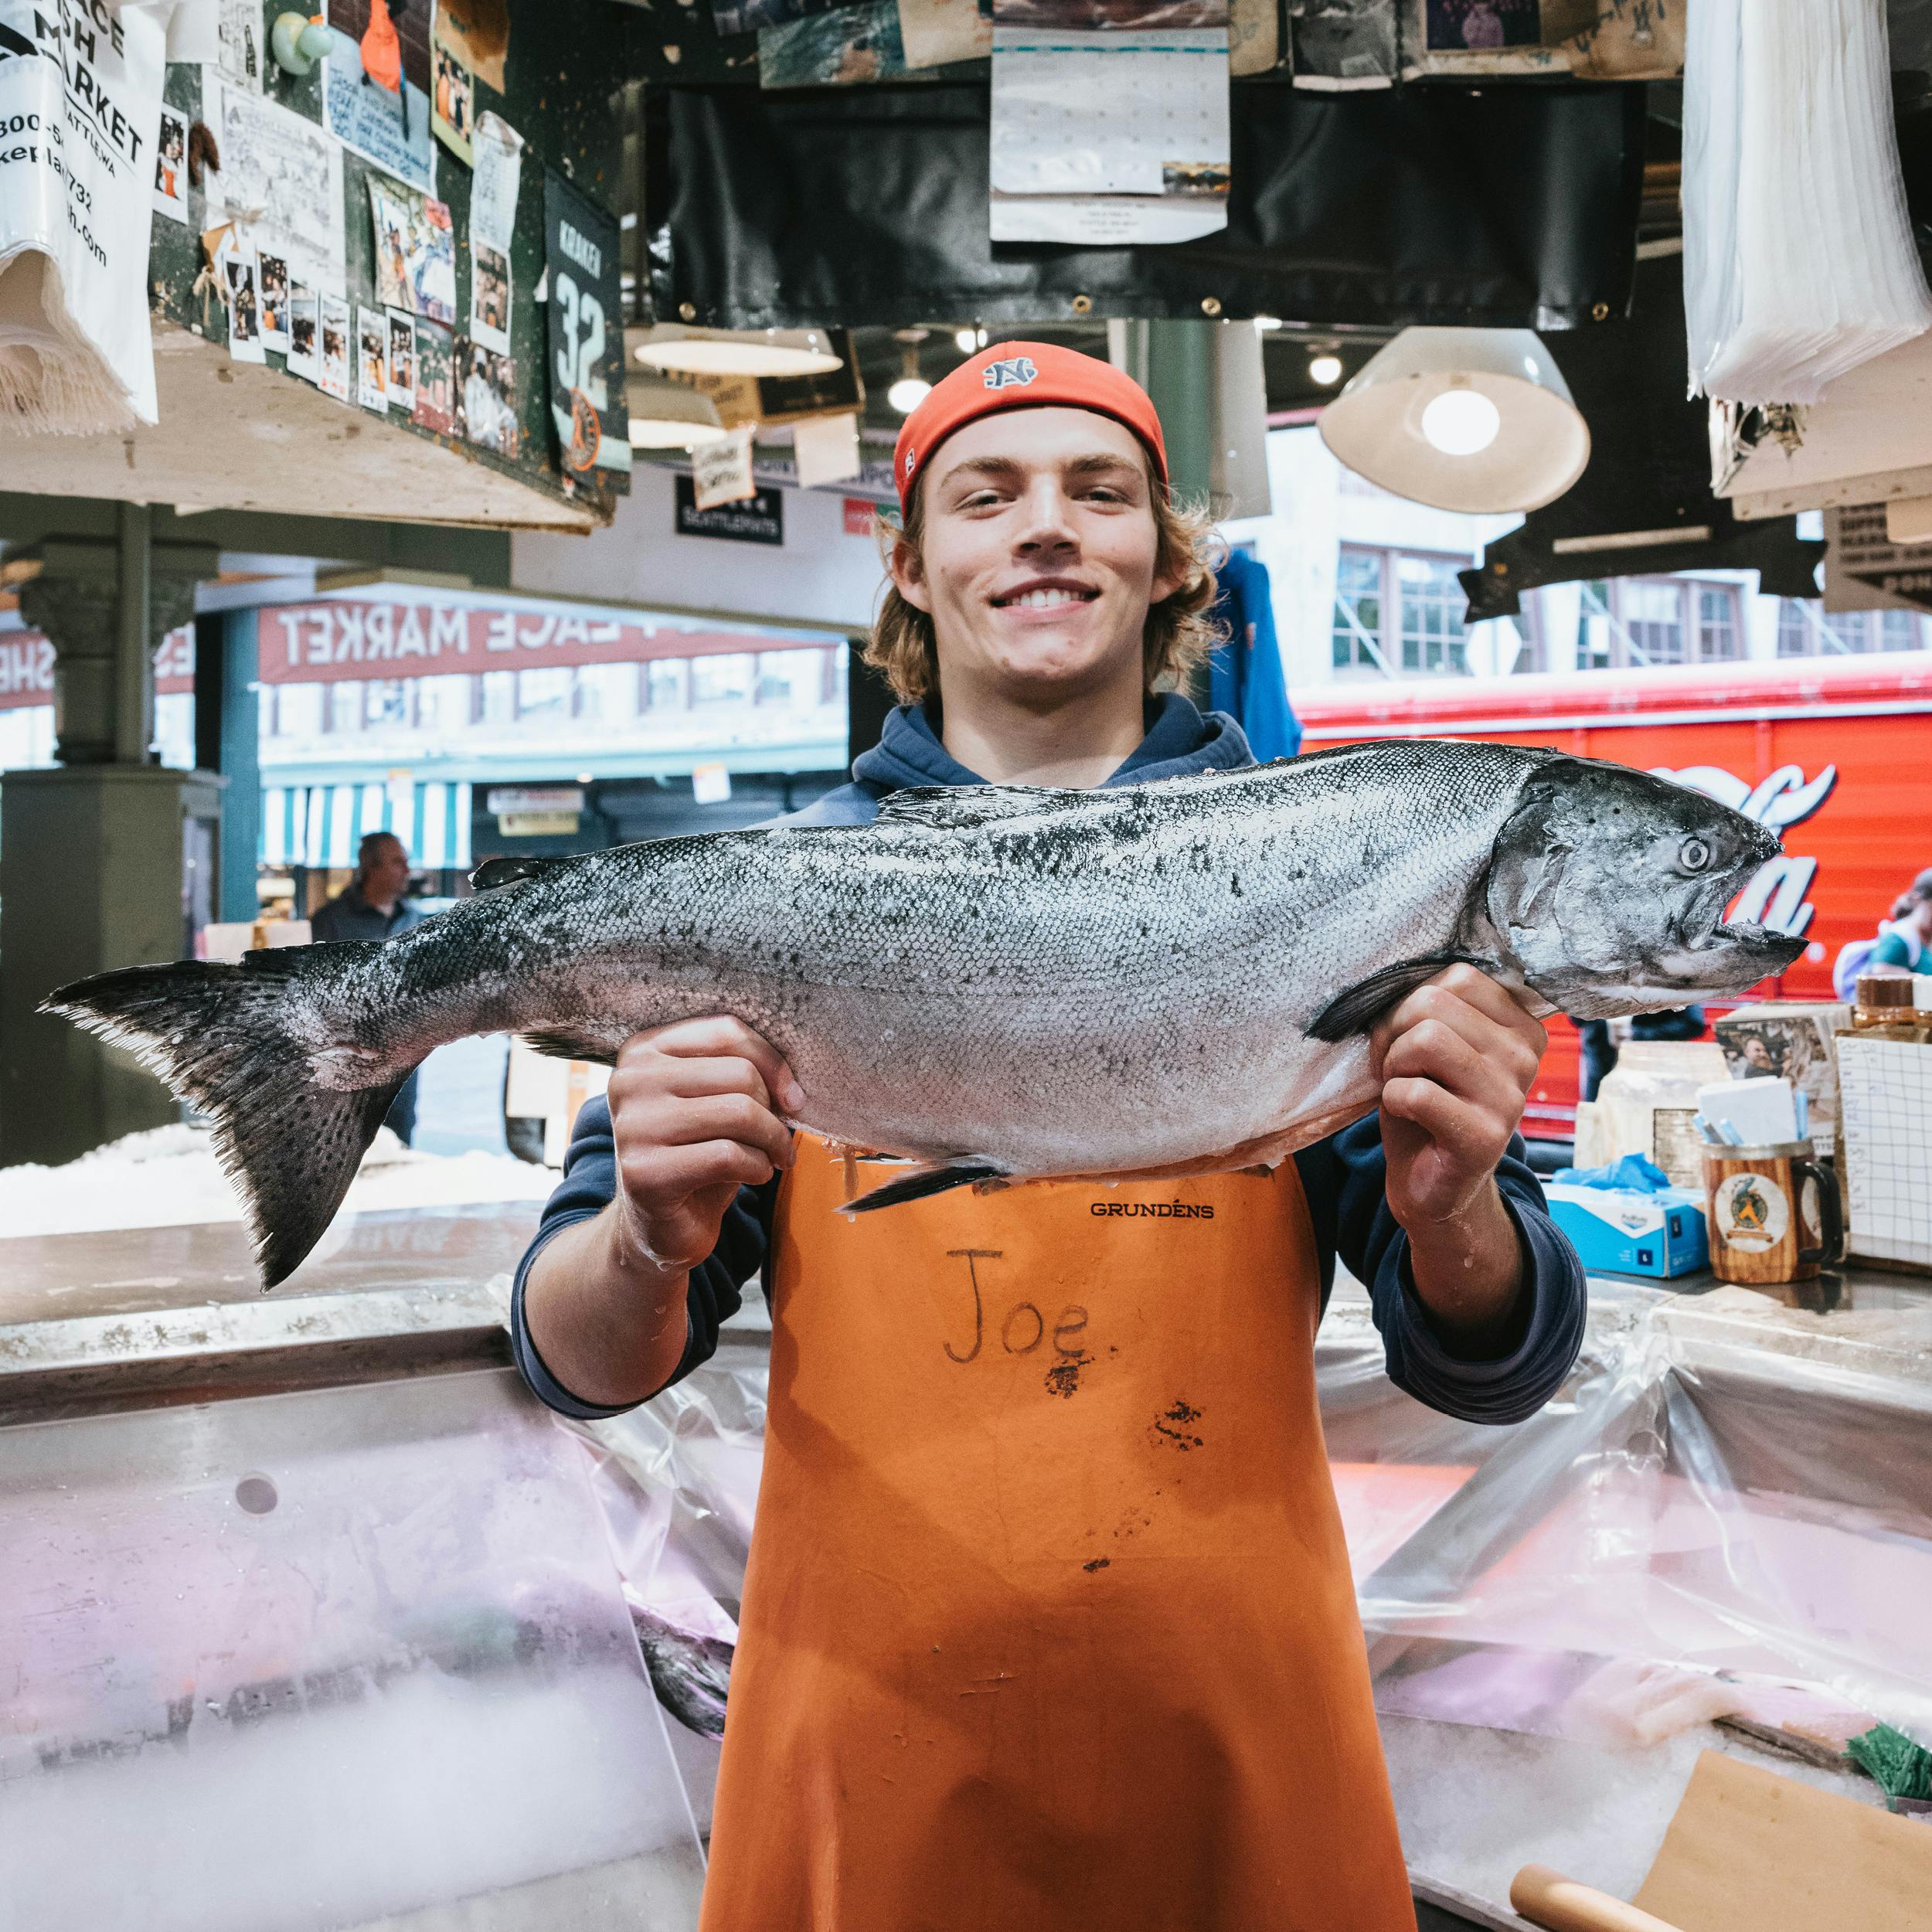 King Salmon - Whole Fish, Wild, Pacific, USA by Pike Place Fish